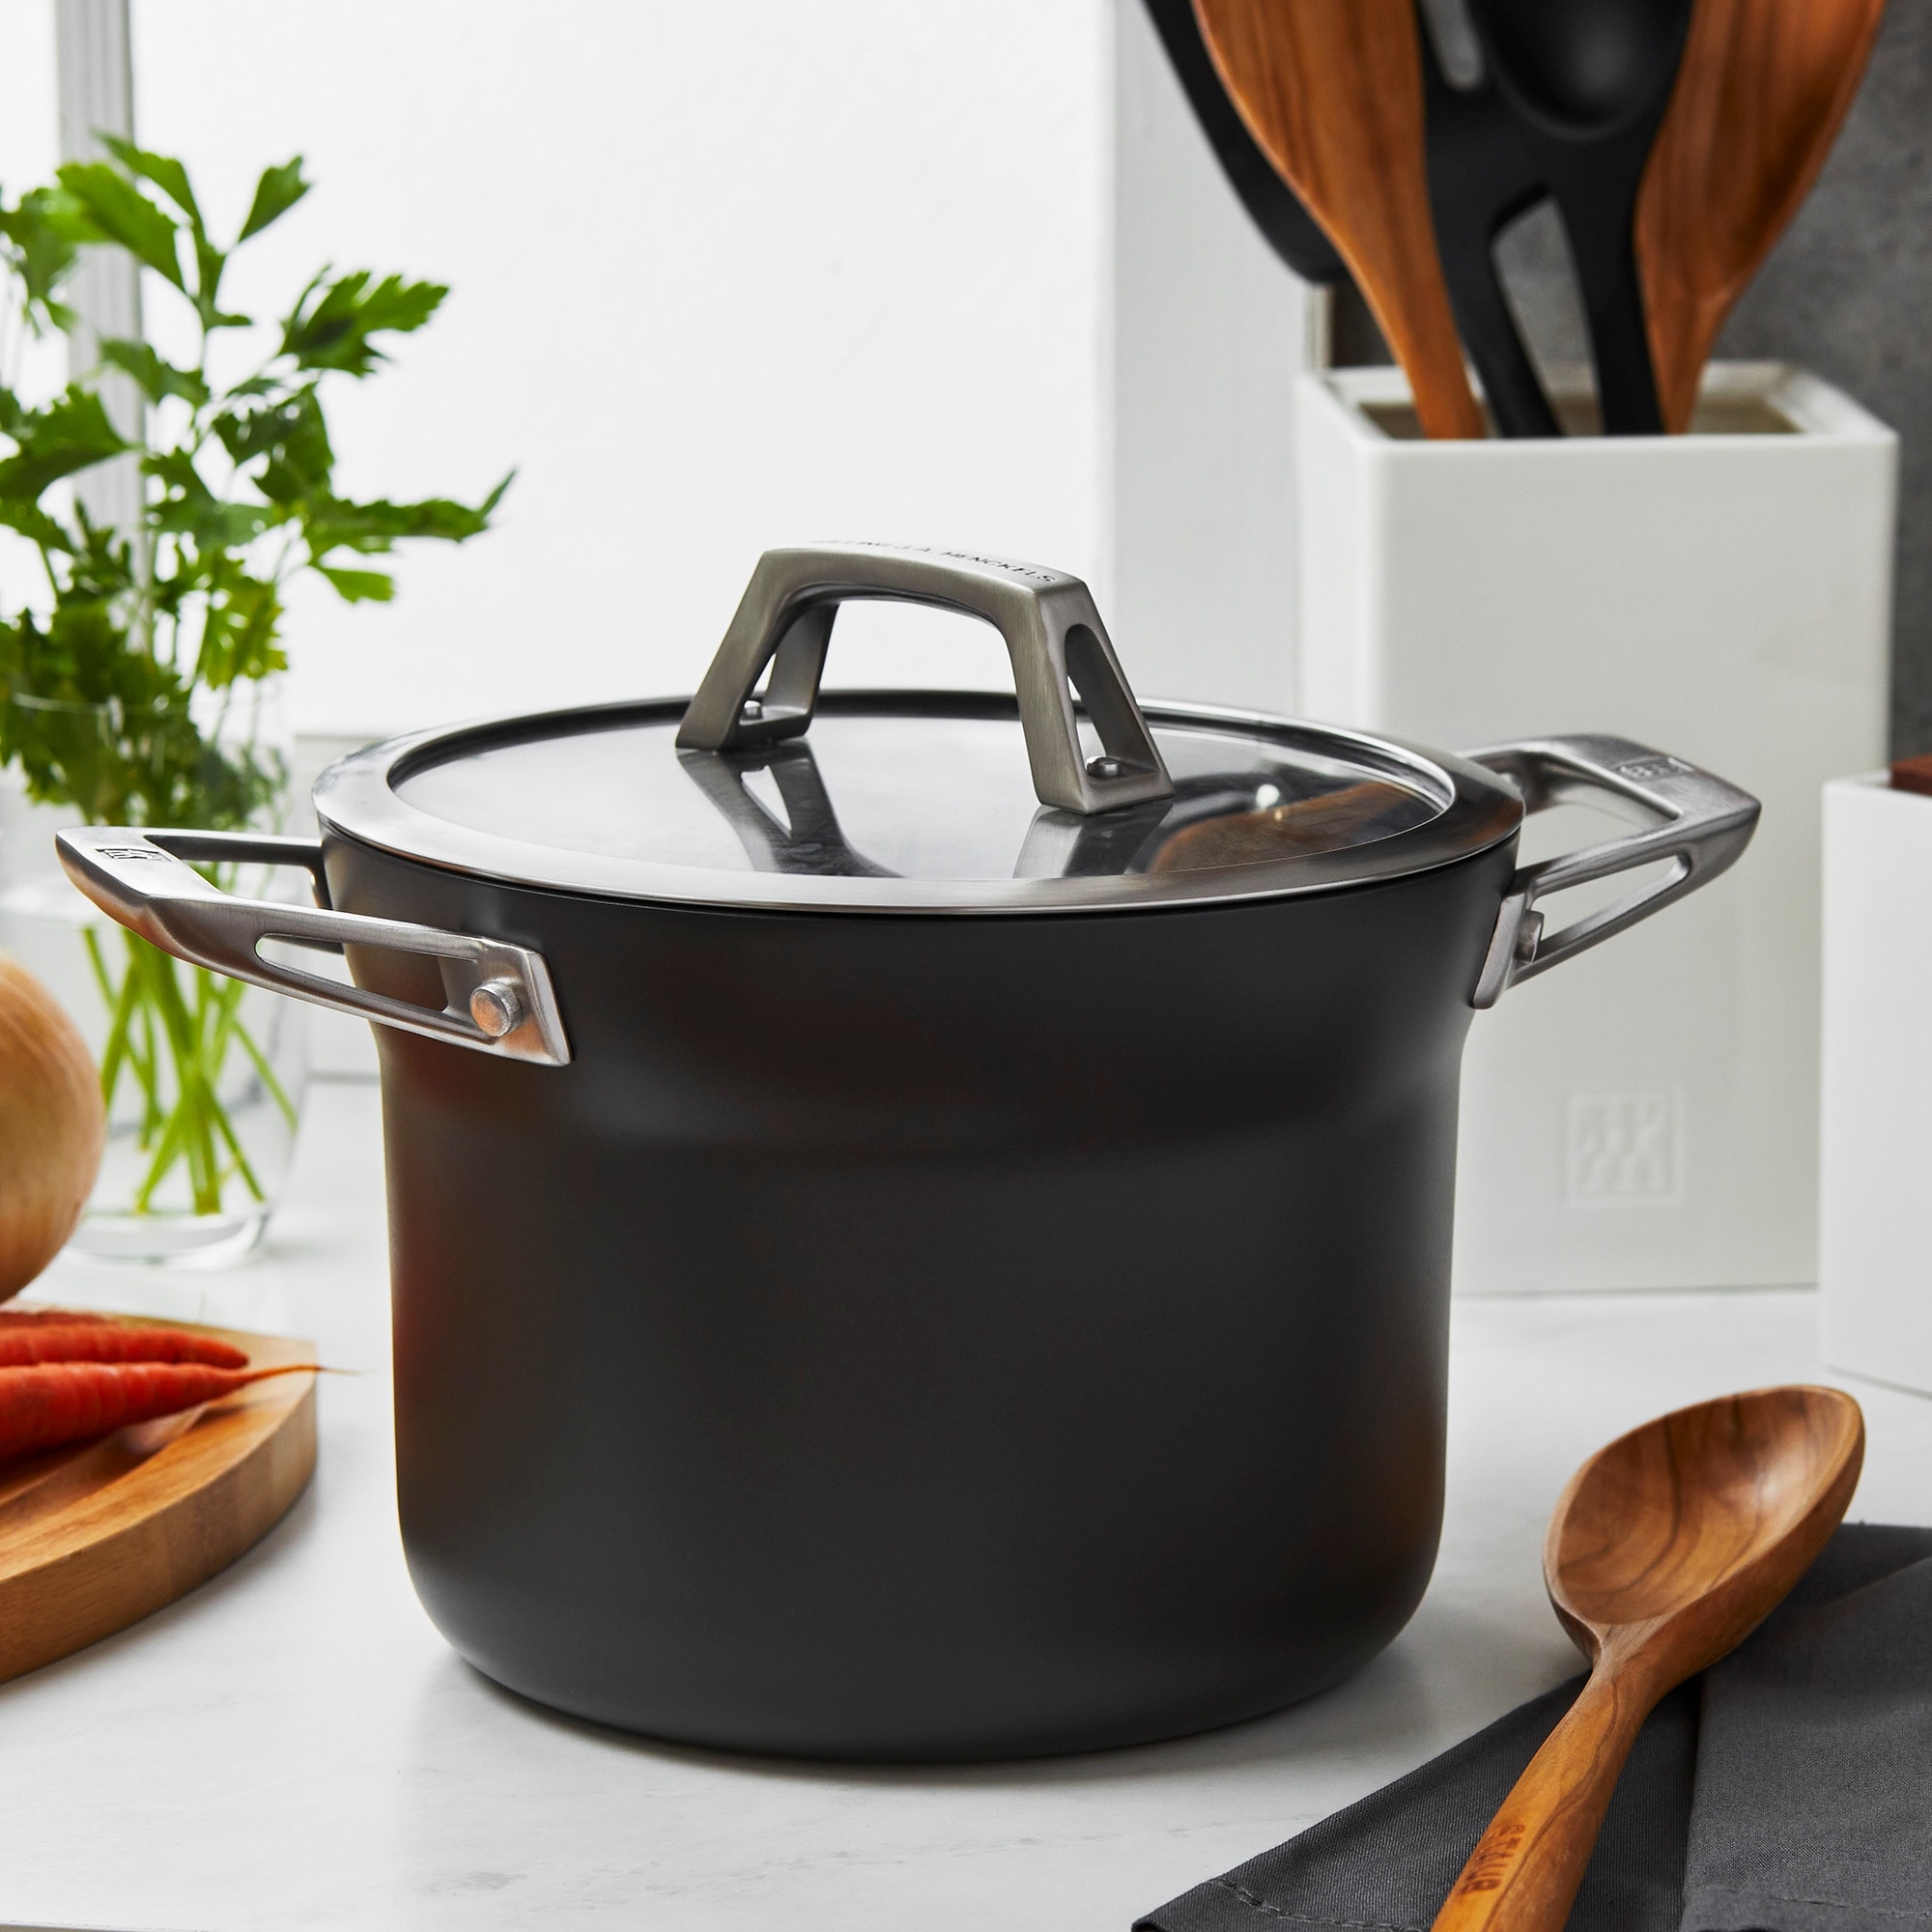 https://ak1.ostkcdn.com/images/products/is/images/direct/aacd32565d2aedf69aadcd1eb08b1ff322647dd3/ZWILLING-Motion-Hard-Anodized-4-qt-Aluminum-Nonstick-Soup-Pot.jpg